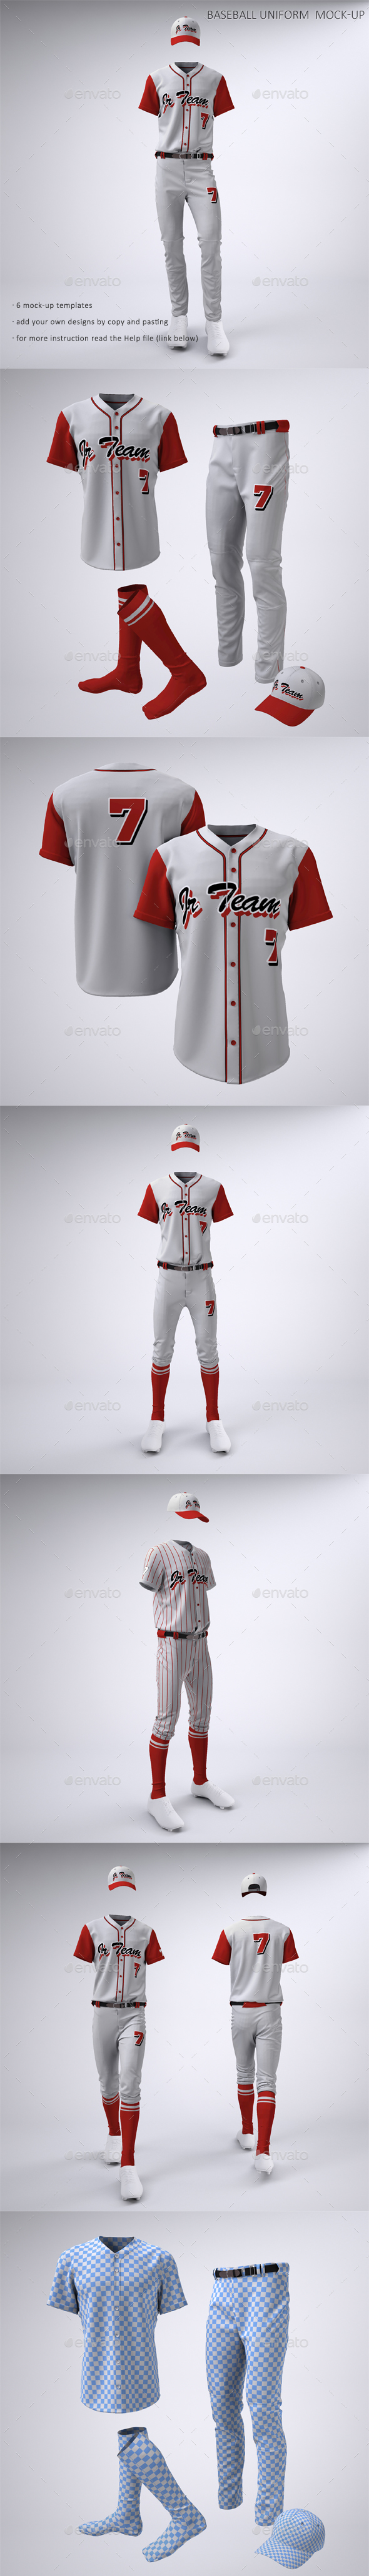 Download Baseball Team Jerseys And Uniform Mock Up By Sanchi477 Graphicriver